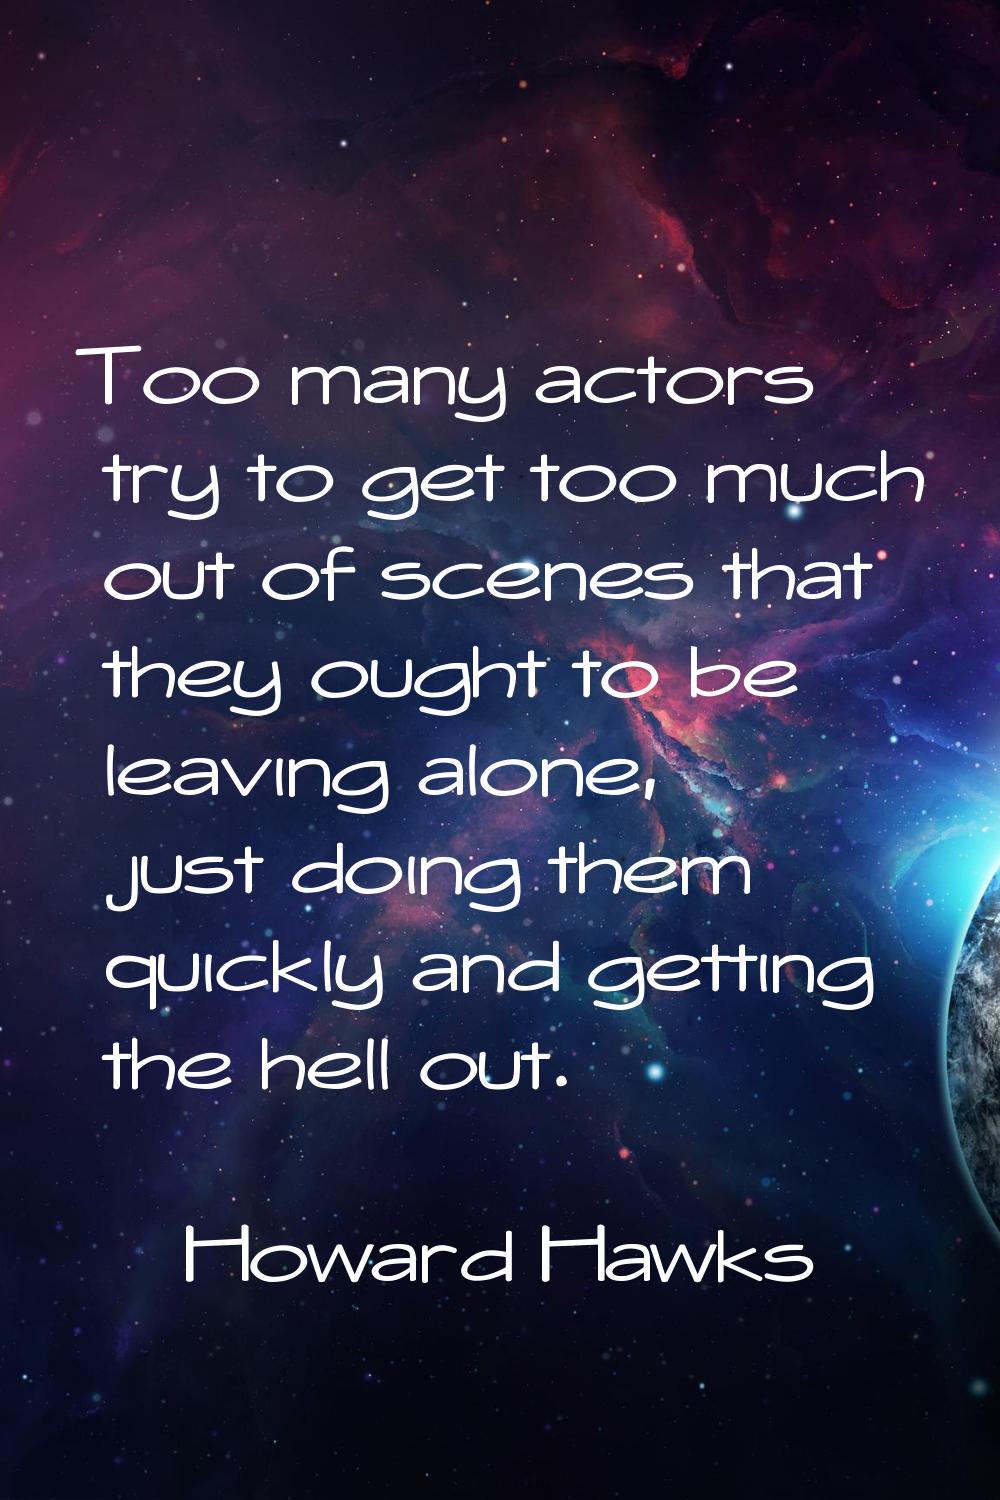 Too many actors try to get too much out of scenes that they ought to be leaving alone, just doing t